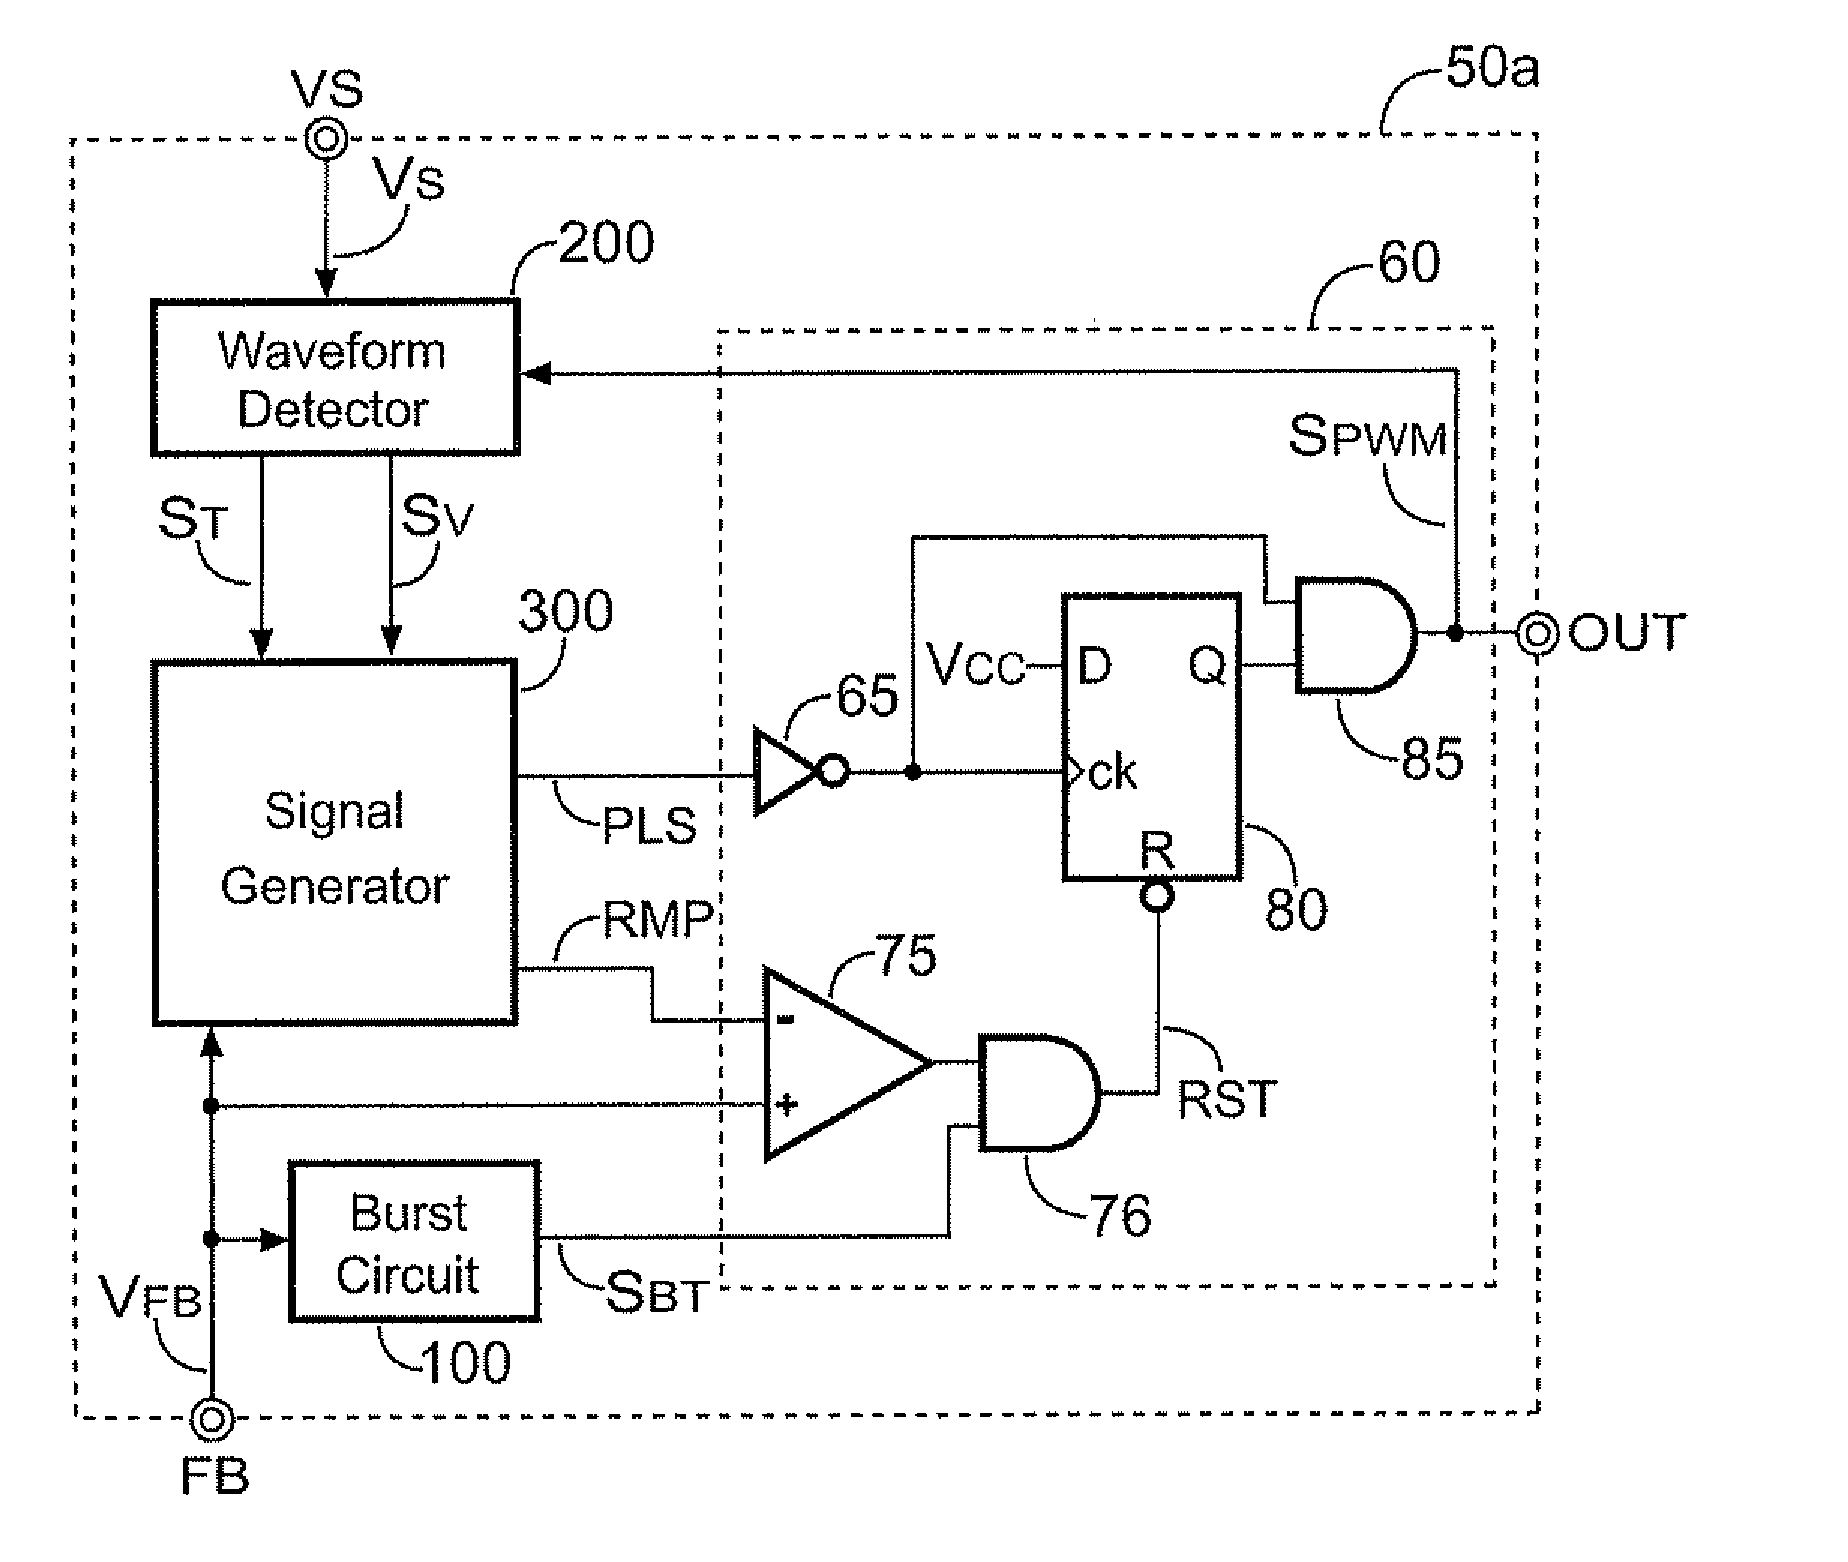 Switching controller with valley-lock switching and limited maximum frequency for quasi-resonant power converters